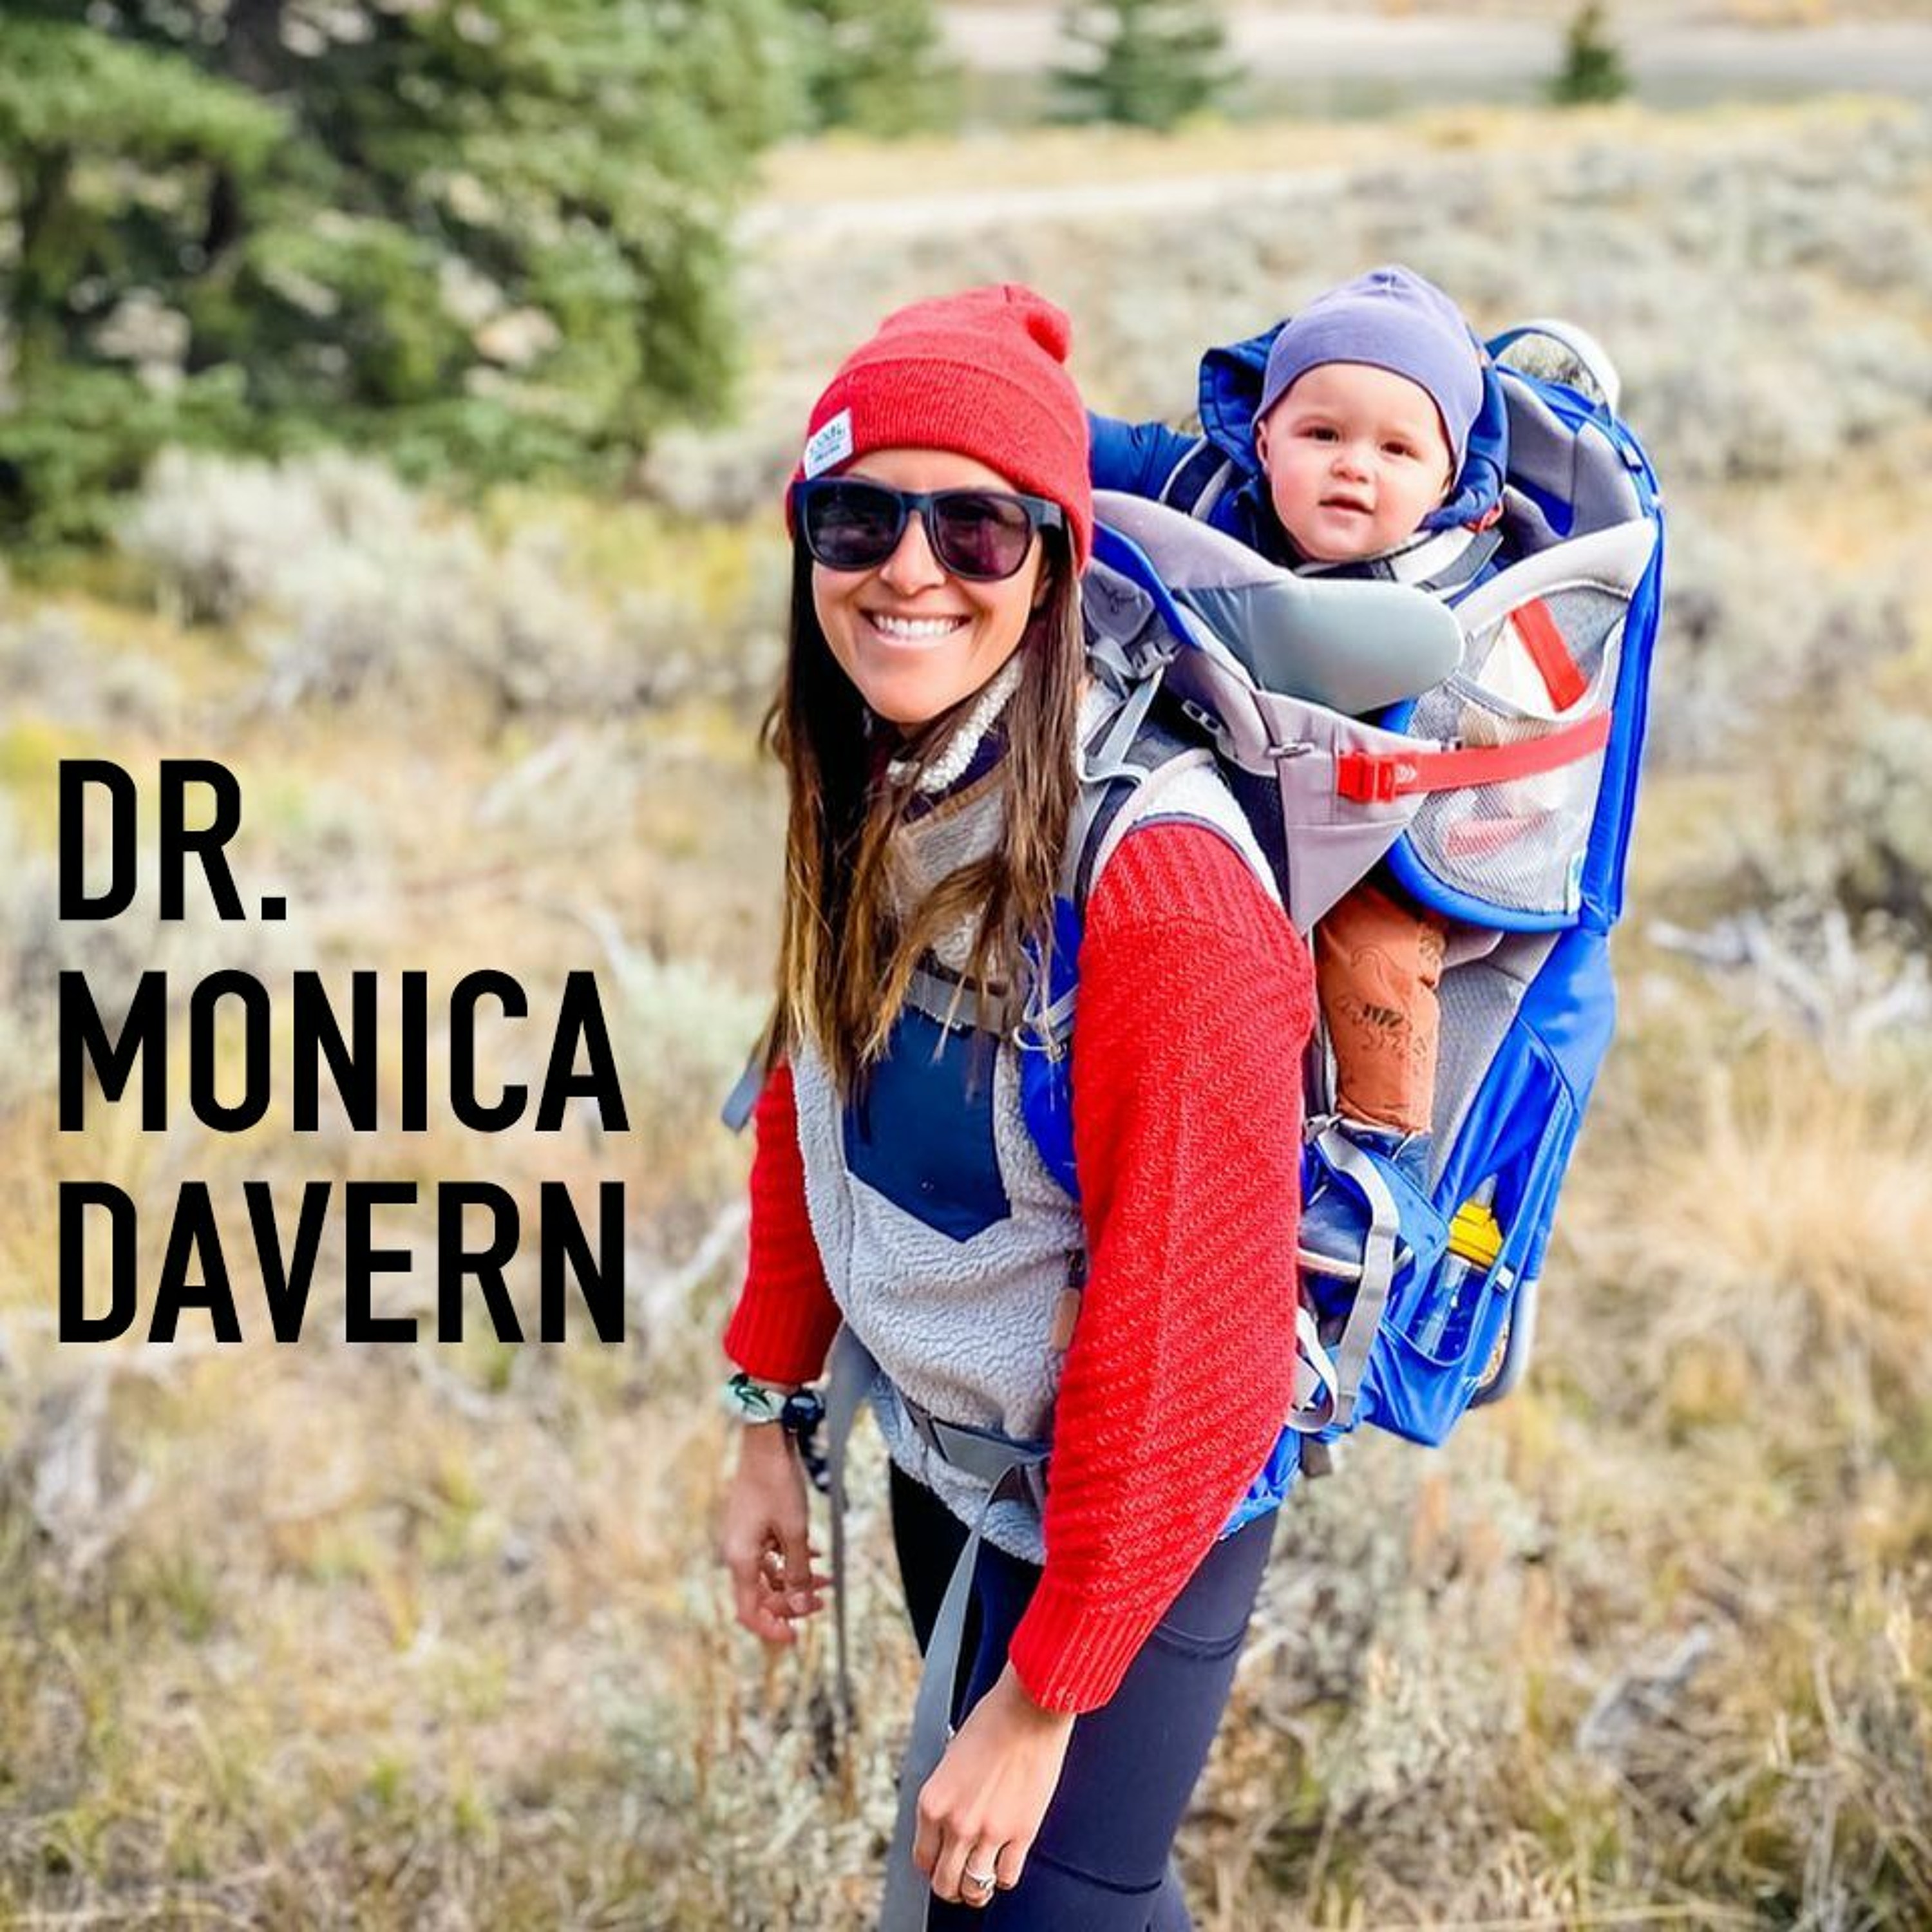 Dr. Monica Davern, Vegan Athlete On Elevated Parenting And What To Know About Dairy